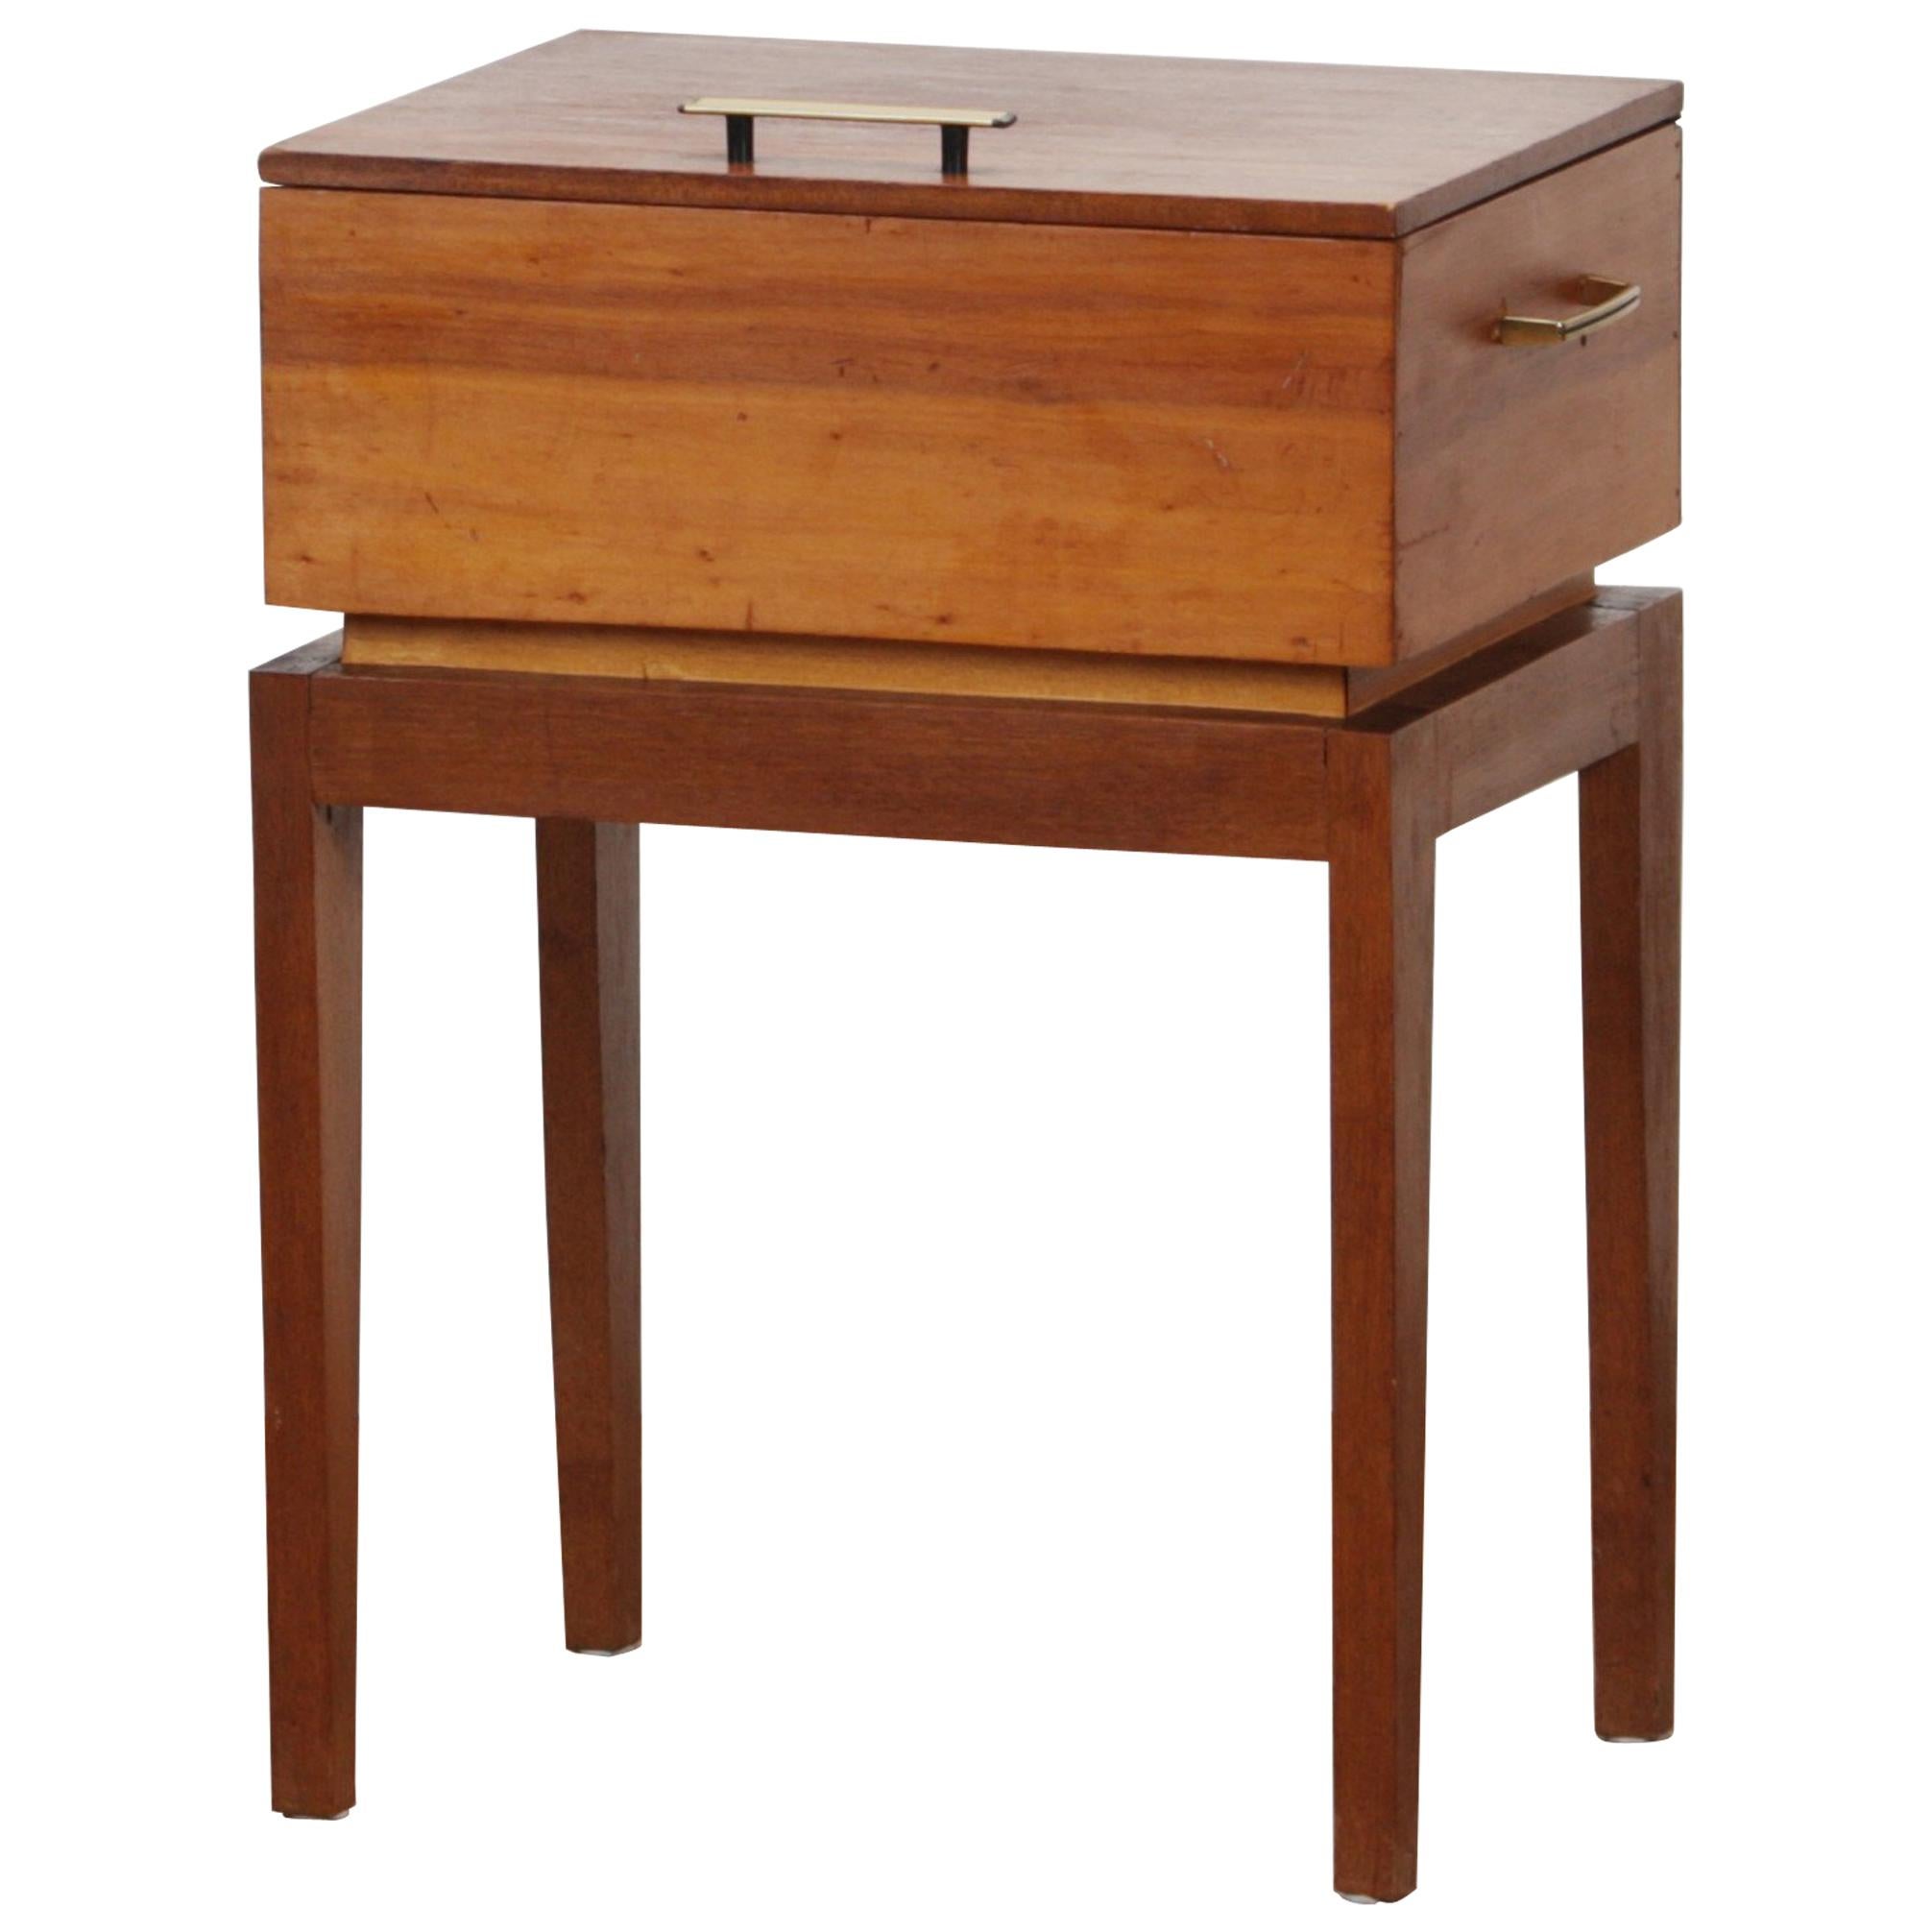 Beautiful sewing, side table.
This side table with storage is made from teak and pine and is in excellent vintage condition.
Period 1950s.
Dimensions: H 56 cm, W 40 cm, D 32 cm.